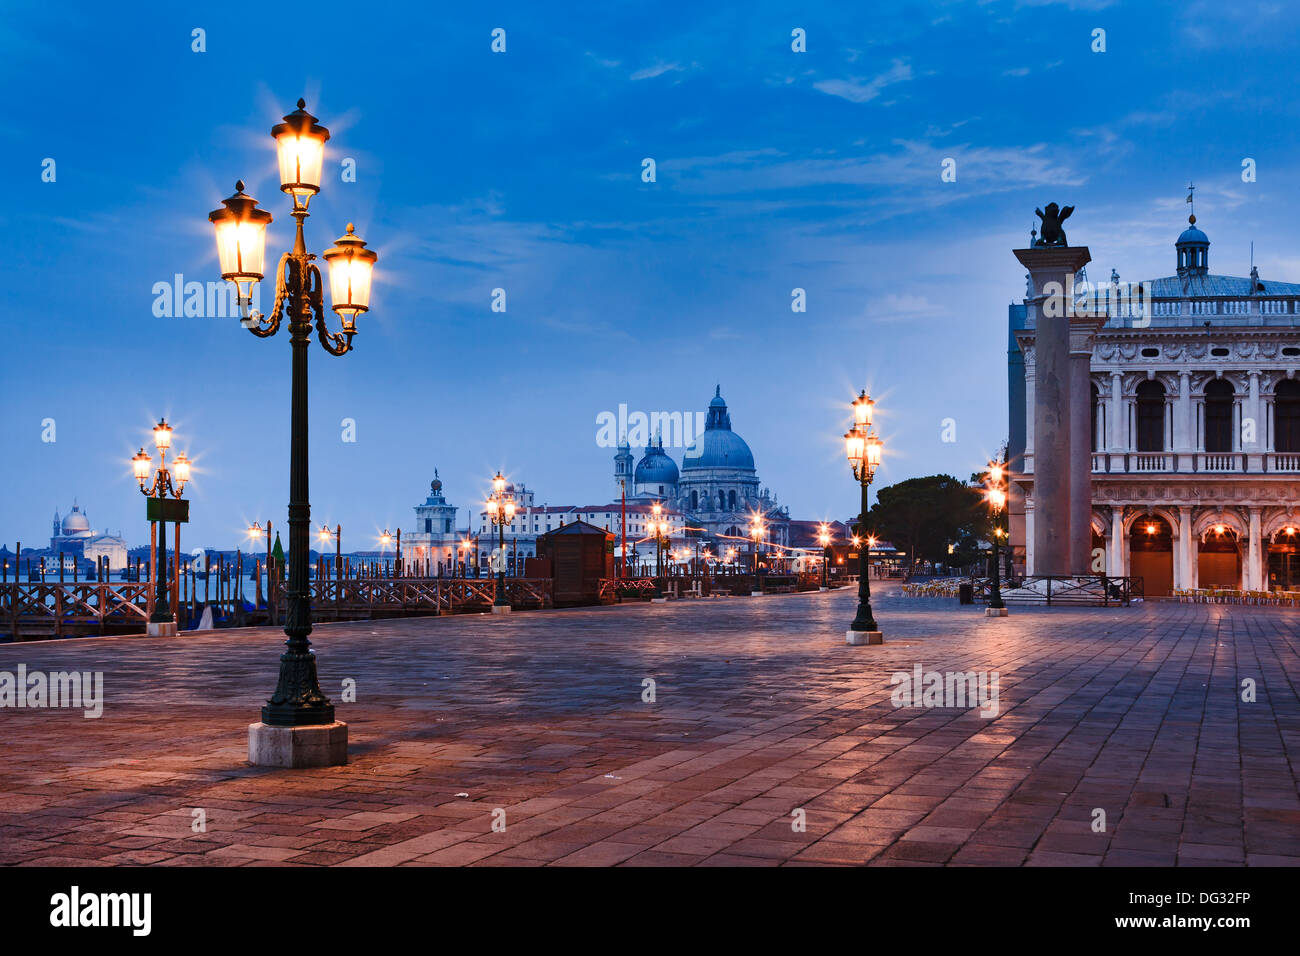 Italy Venice sunrise view on st marco square and Sana Maria Della Salute cathedral between illuminated street lamps Stock Photo